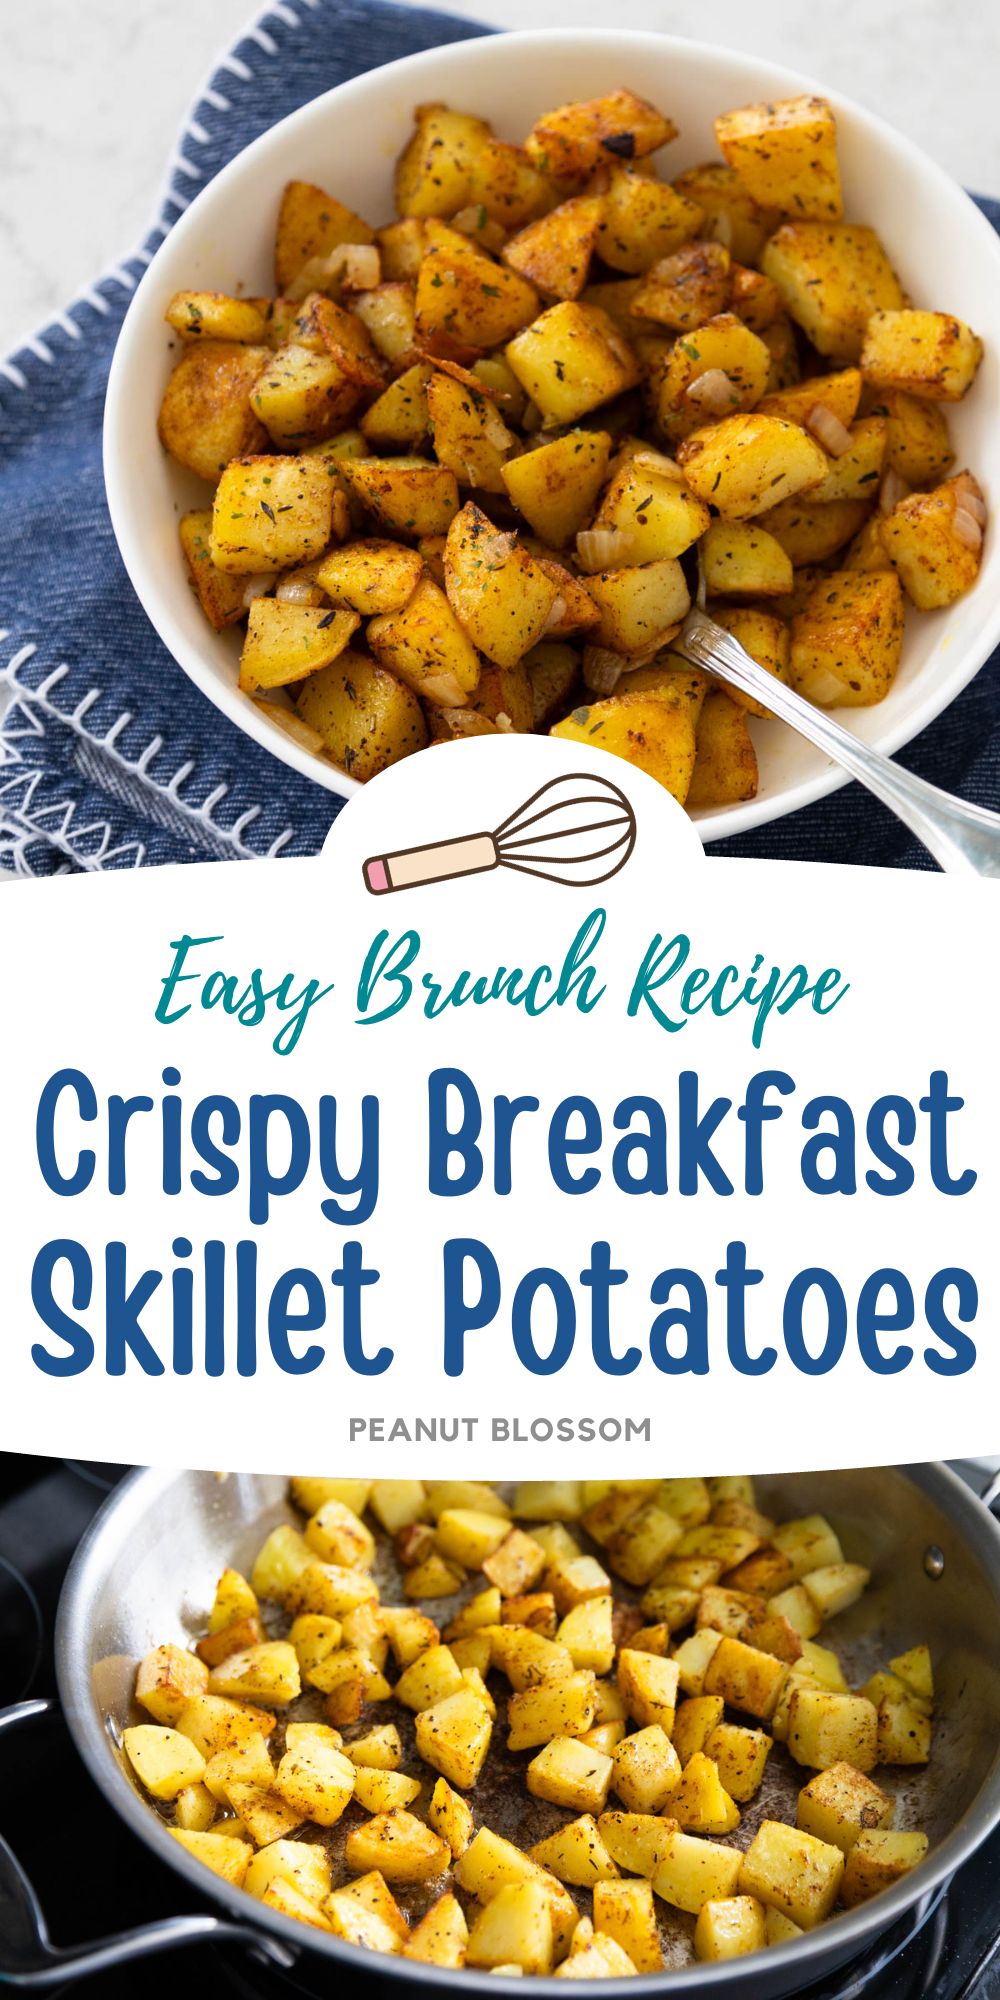 The photo collage shows the crispy breakfast potatoes in a serving bowl with a spoon next to a photo of them being browned in a stovetop skillet.